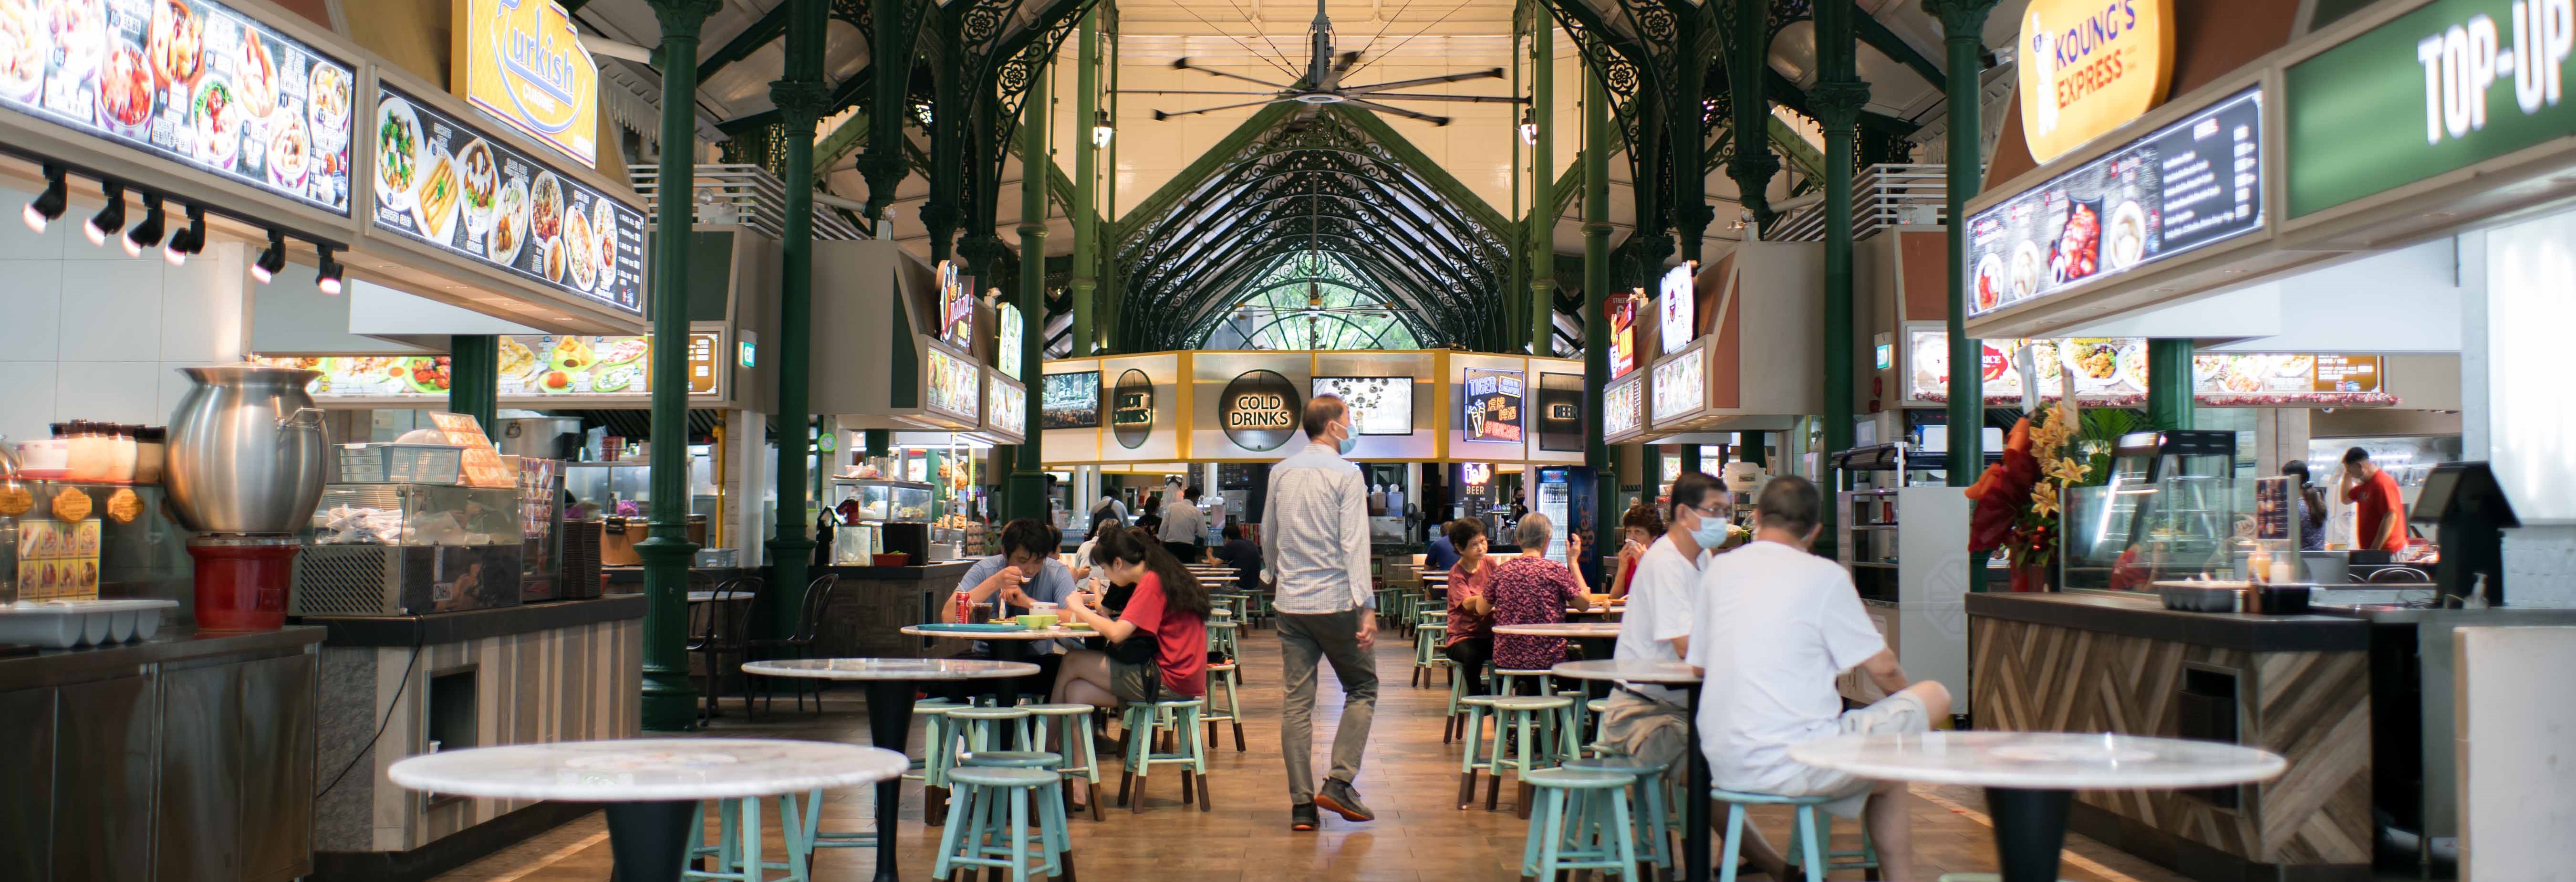 Lau Pa Sat Hawker Centre with a wide variety of stalls selling different cuisines 